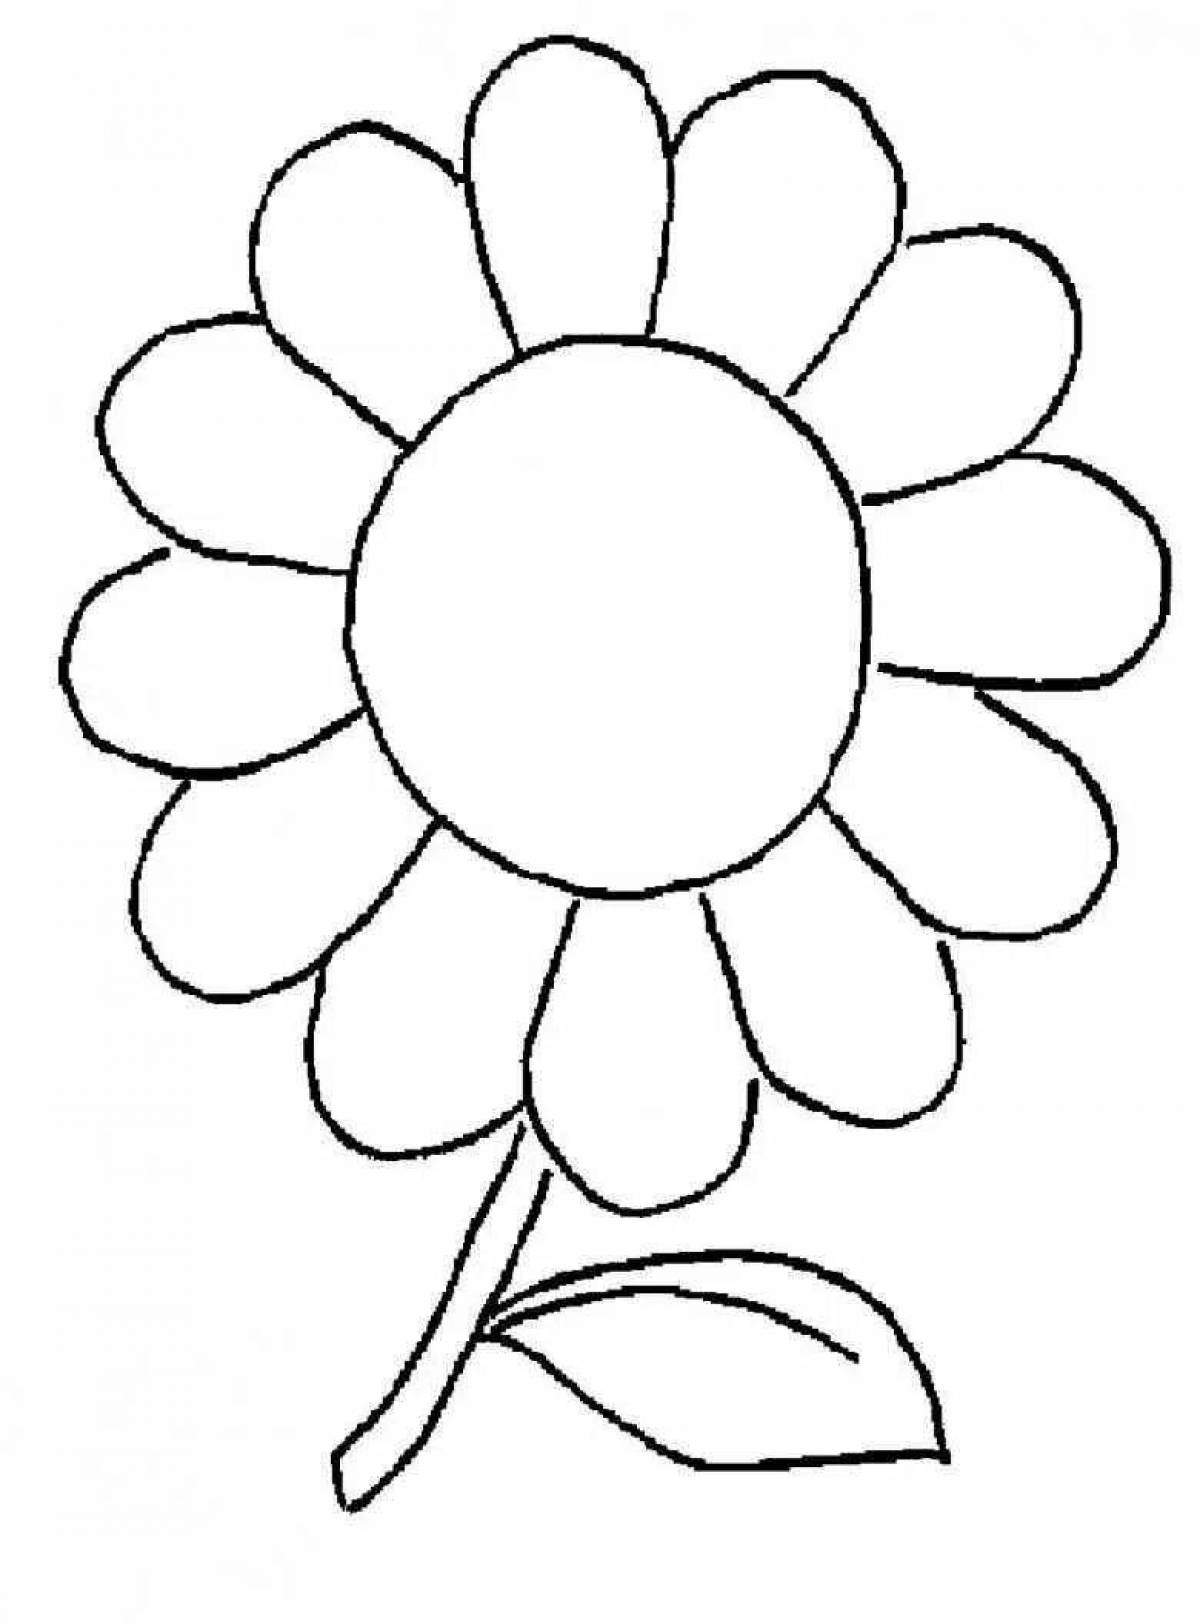 Gorgeous daisy flower coloring for kids